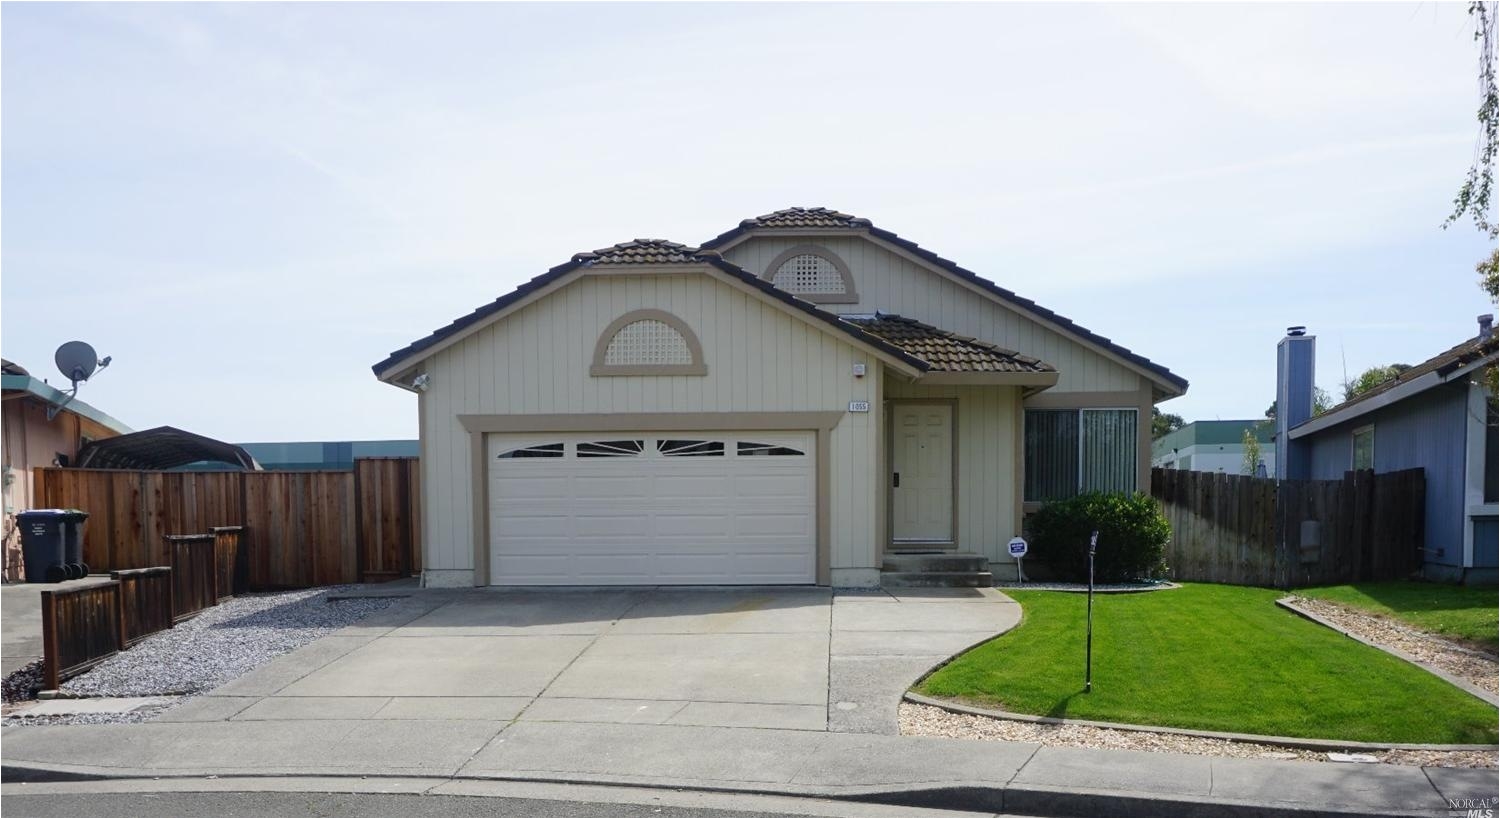 1055 wood hollow cir fairfield ca for mobile homes for sale in fairfield california